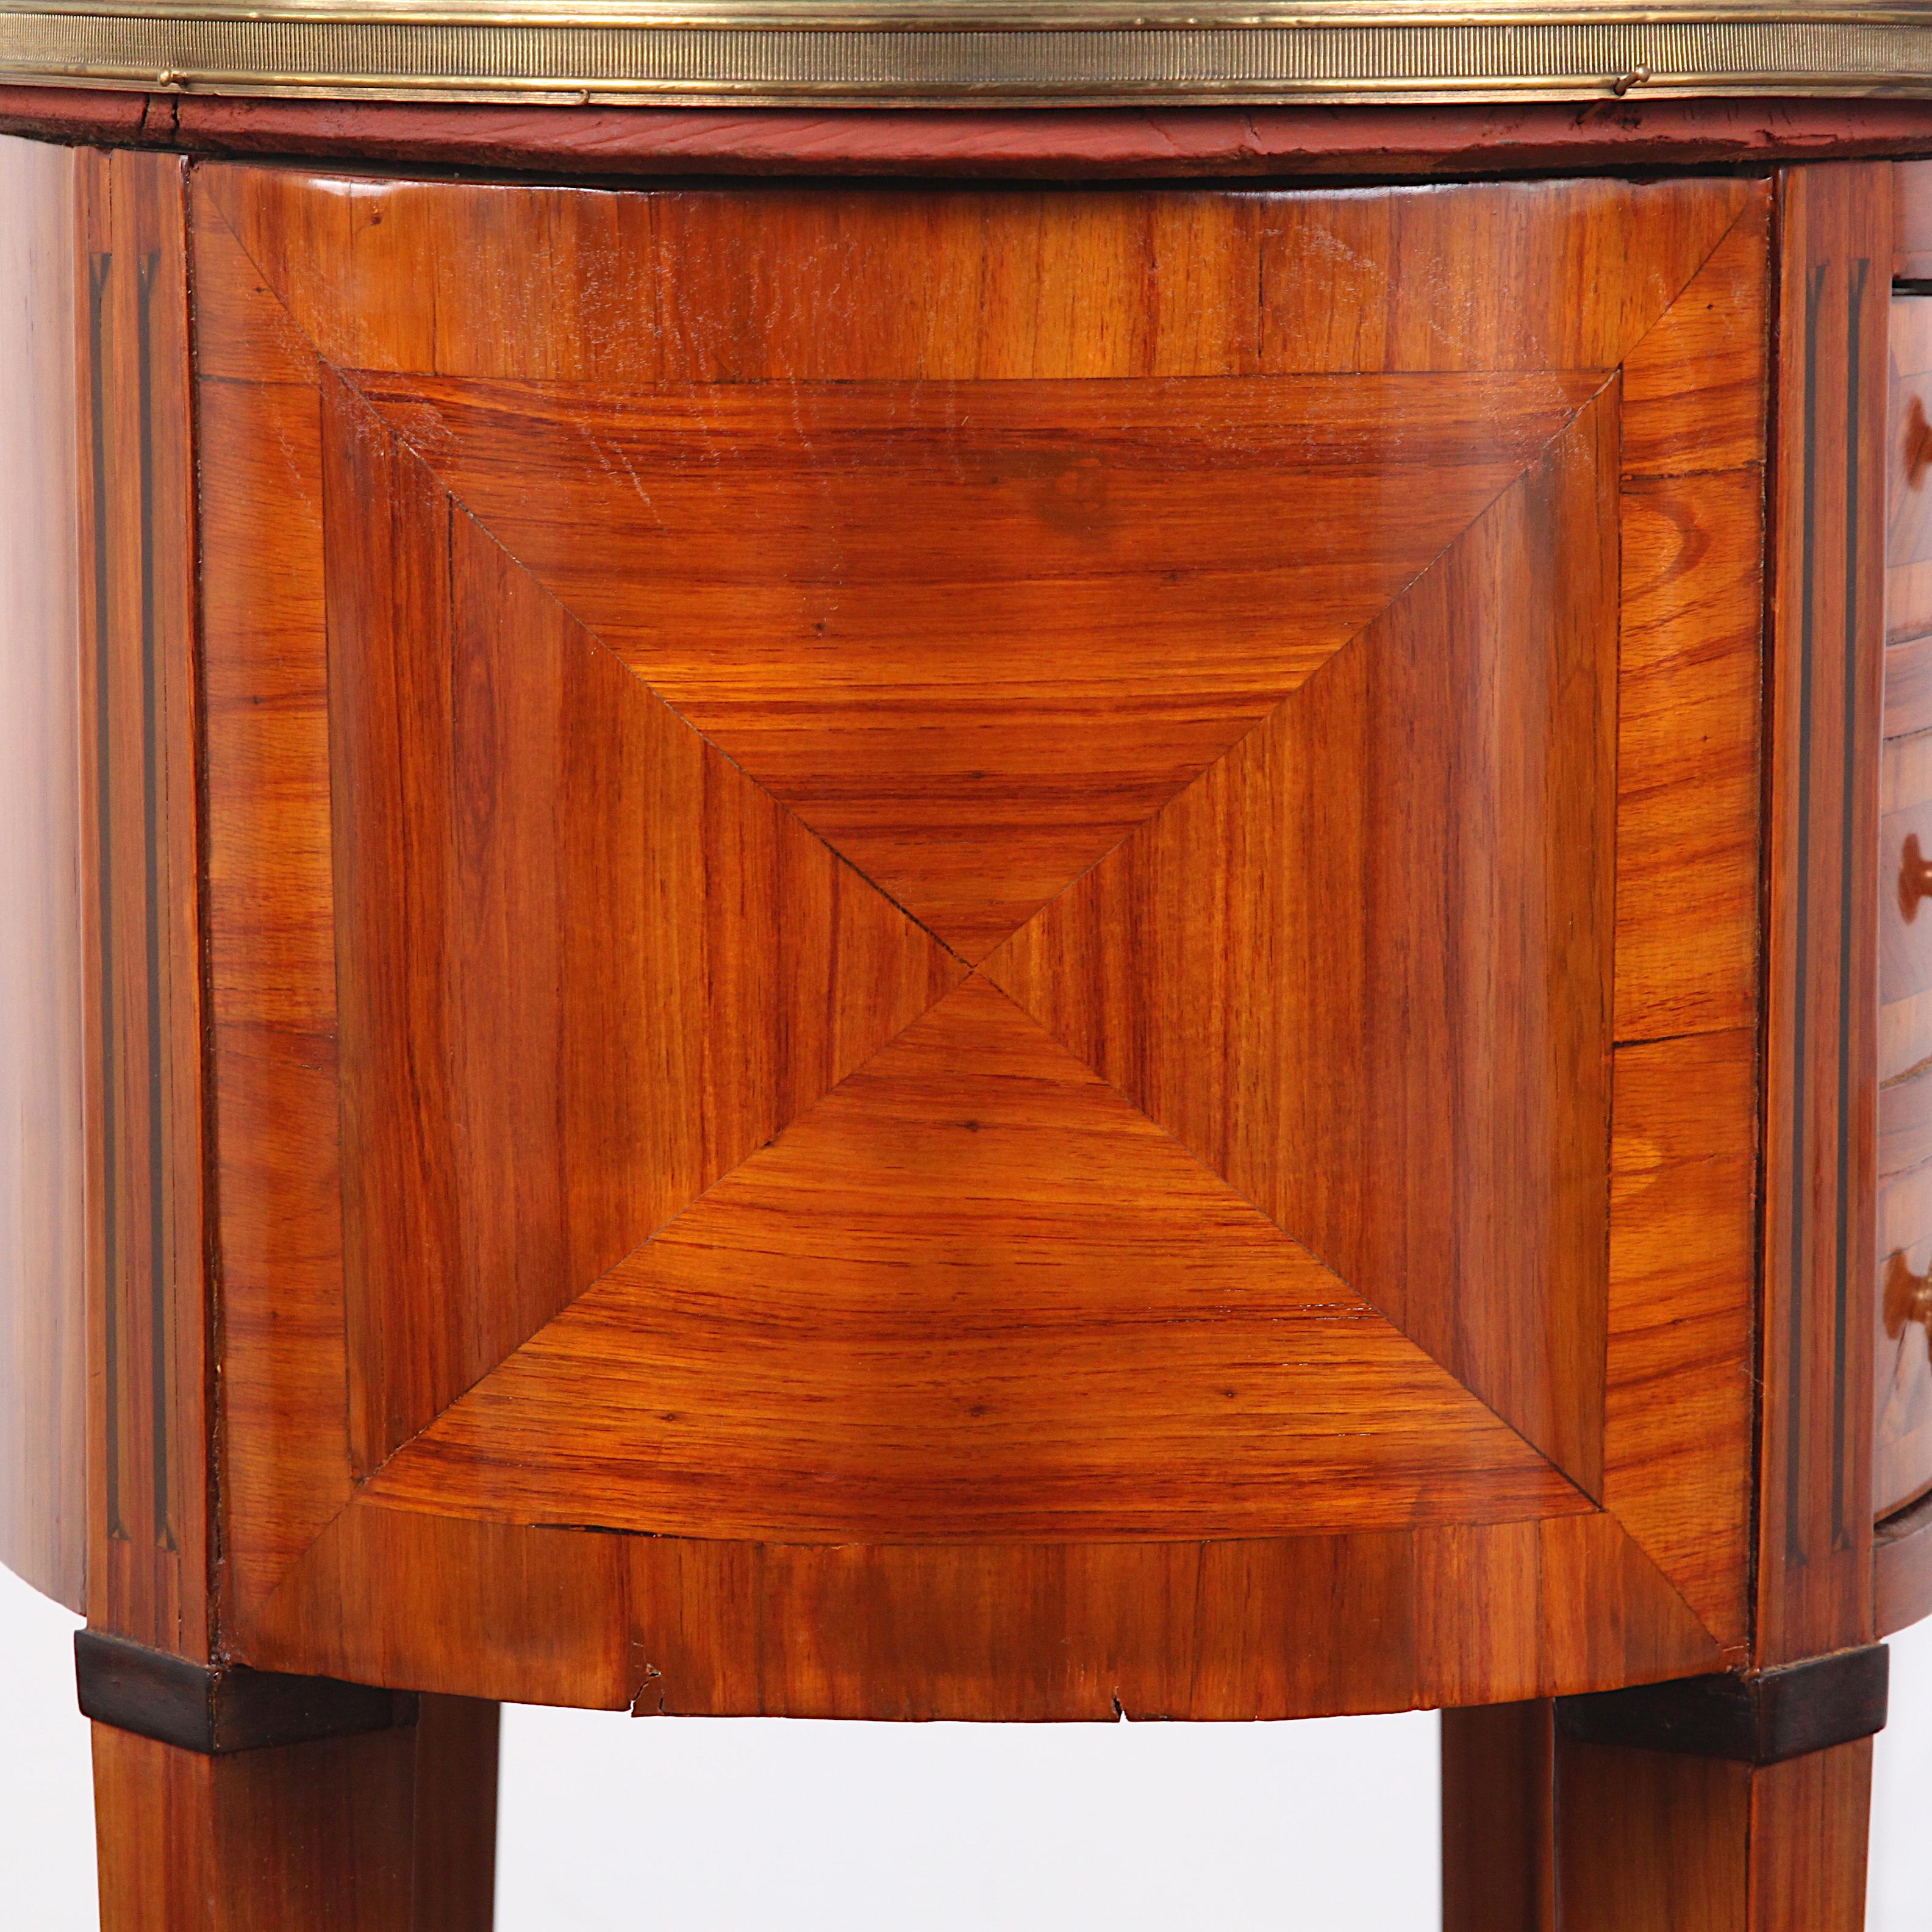 A lovely-quality French oval-shaped nightstand or side table, the sides and door front veneered and banded in kingwood, the oval top with pierced brass gallery, and with long square tapering legs with brass capped feet. The door front has three